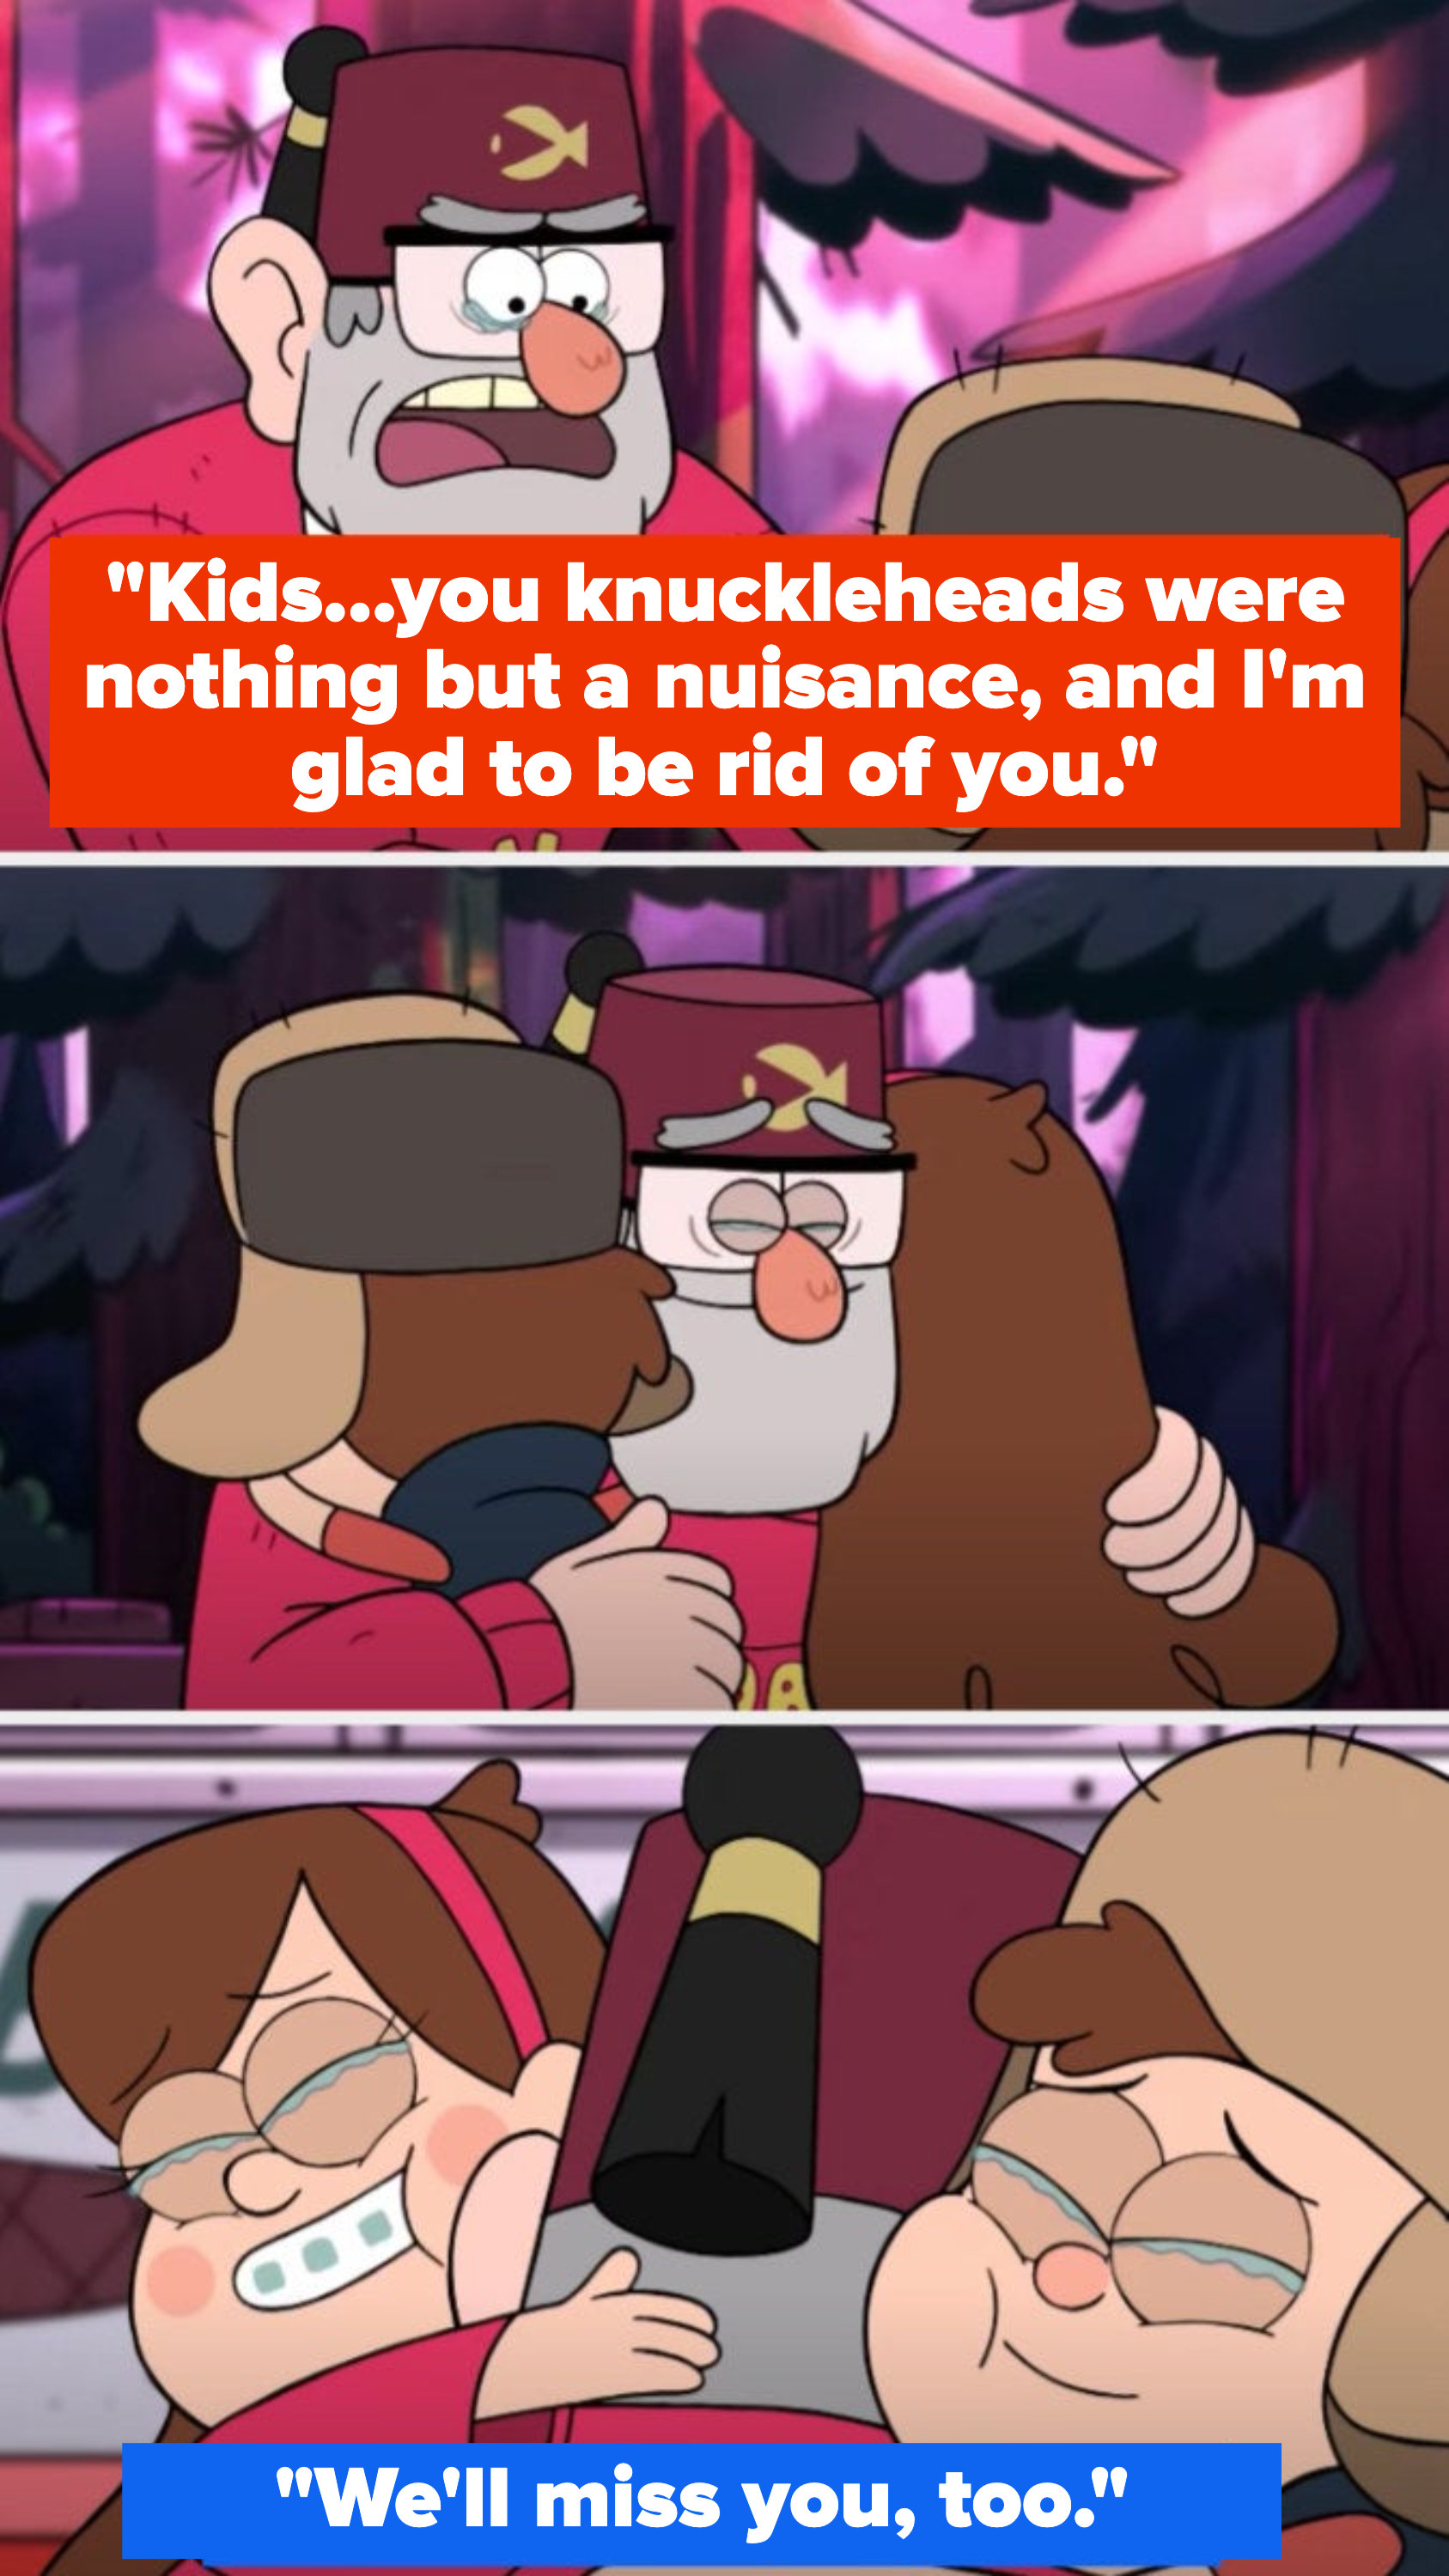 Stan tells Dipper and Mabel he&#x27;s glad to be rid of them while crying, and they hug him, saying they&#x27;ll miss him, too